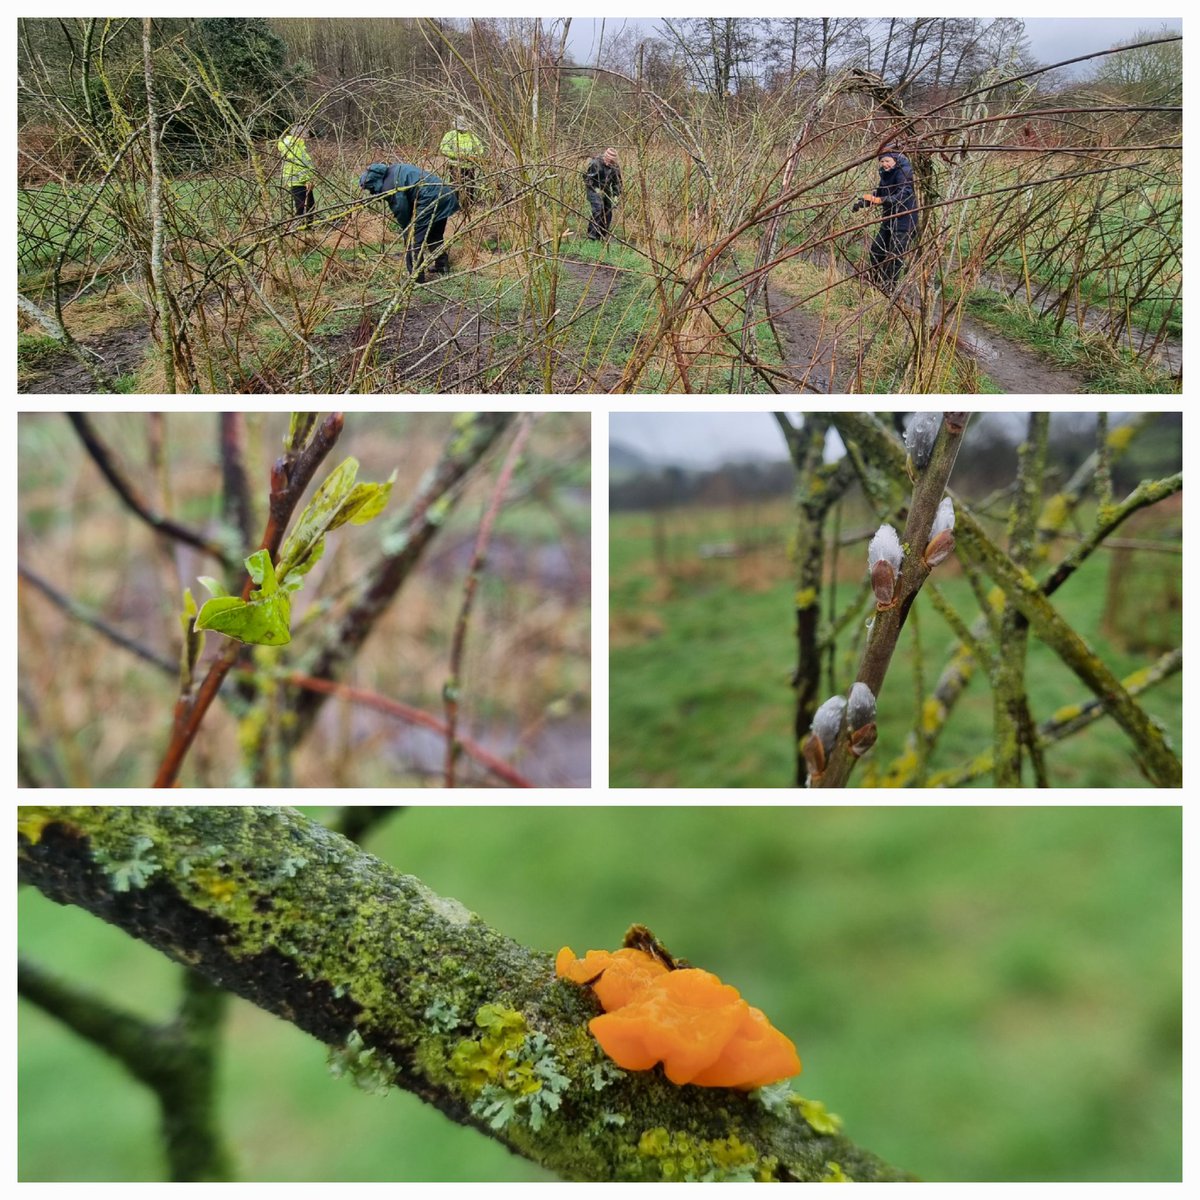 Snow, sleet, hail, sunshine after the rain...all in a day's work for @DerbysWildlife volunteers...today planting willow whips @PeakVillage1 #volunteering #fourseasonsinoneday